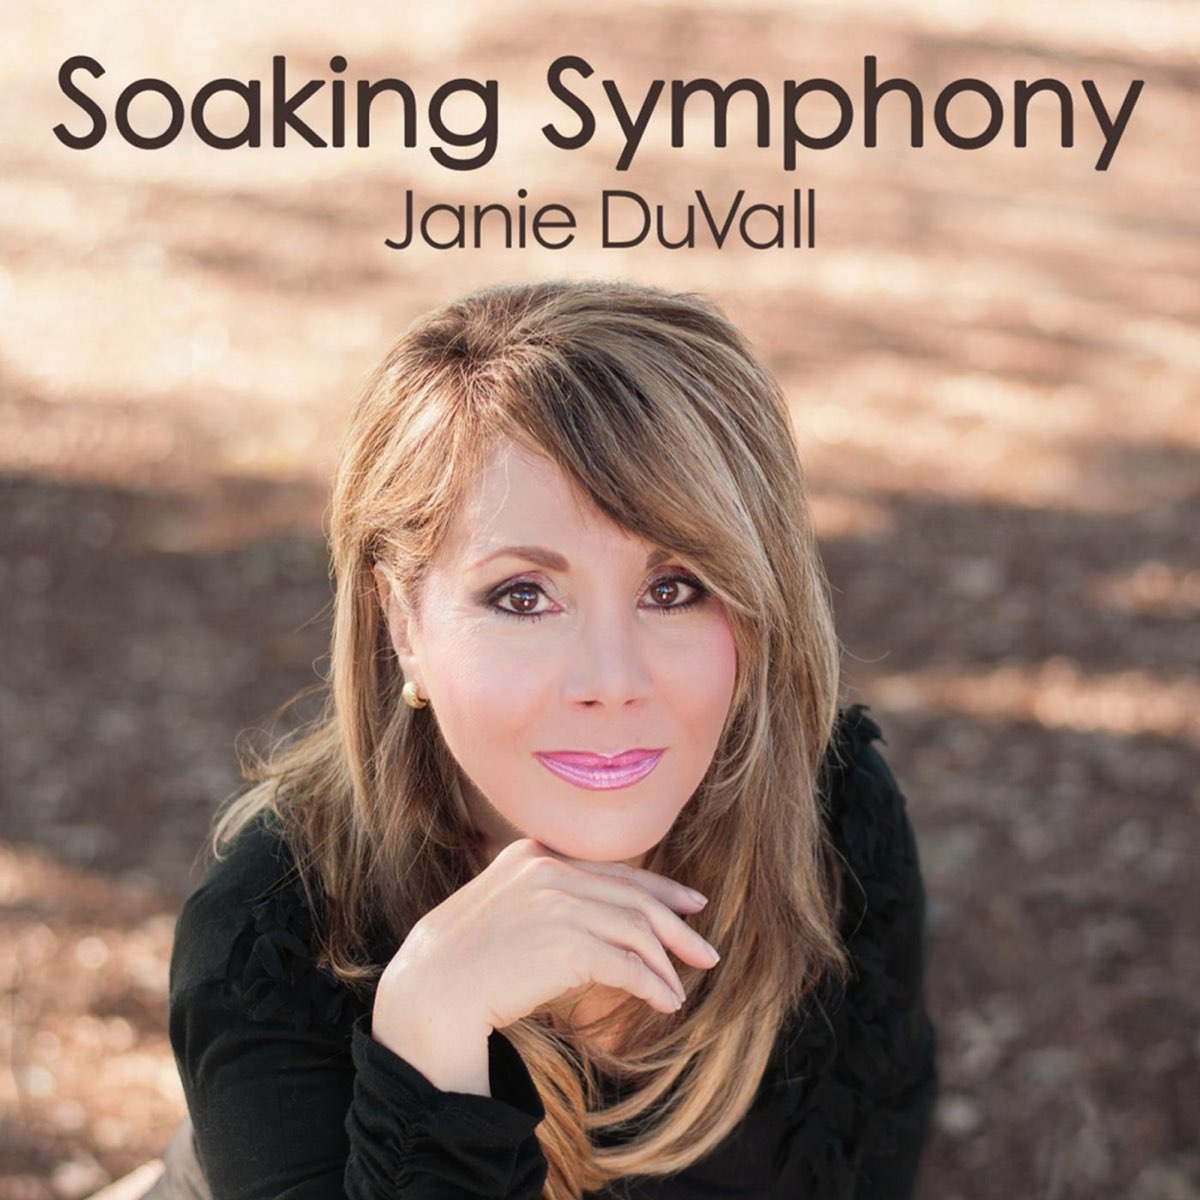 Soaking Symphony by Janie Duvall on iTunes.